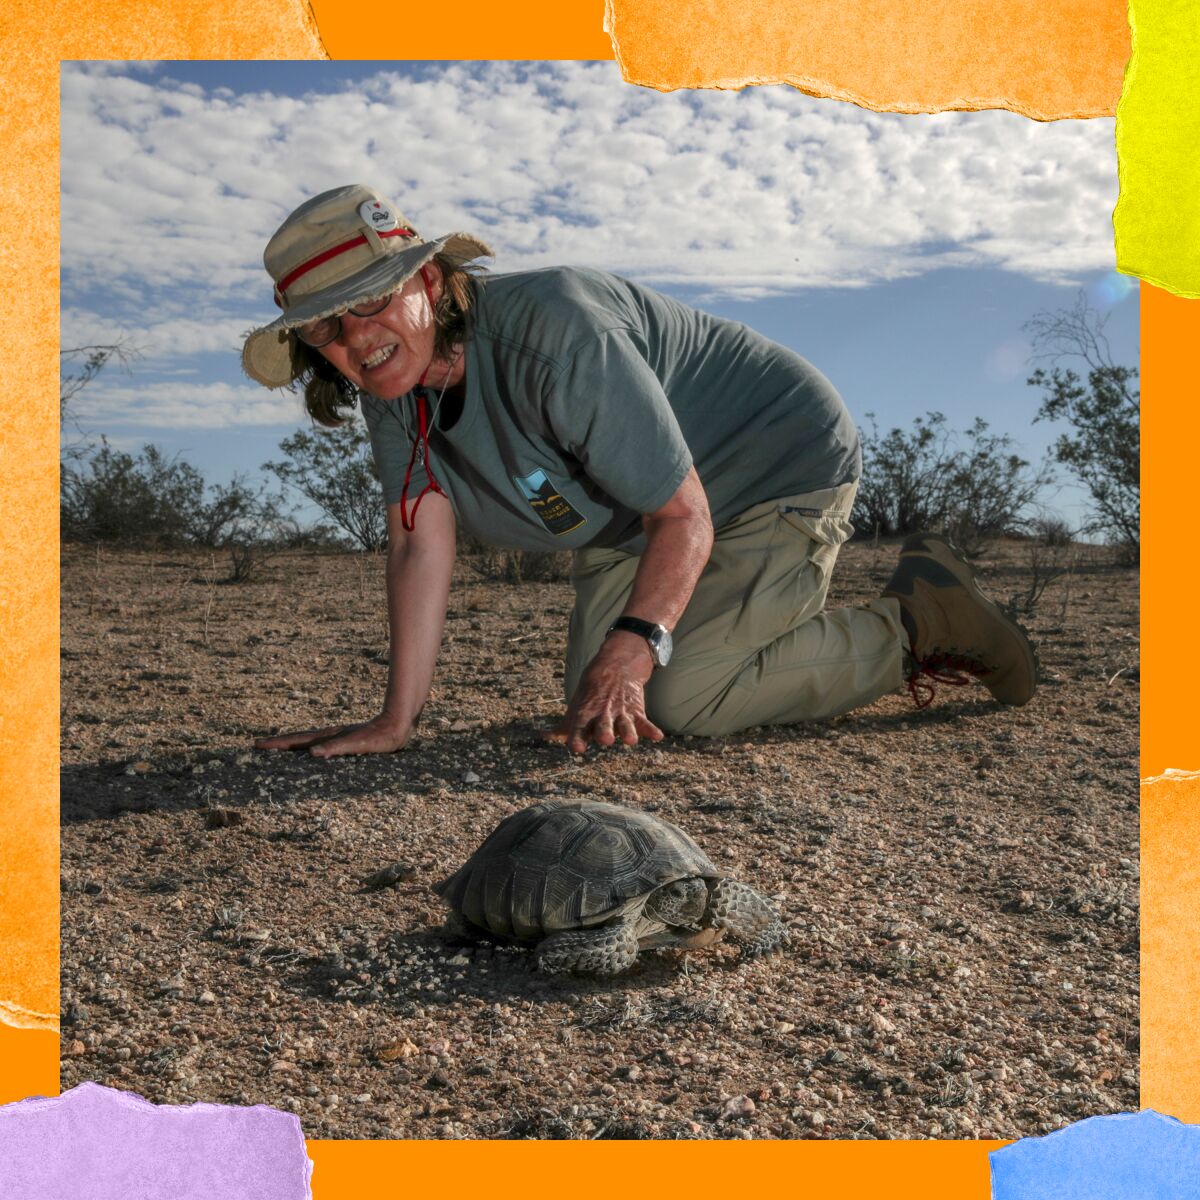 A woman in a bucket hat kneels on the ground next to a large turtle.